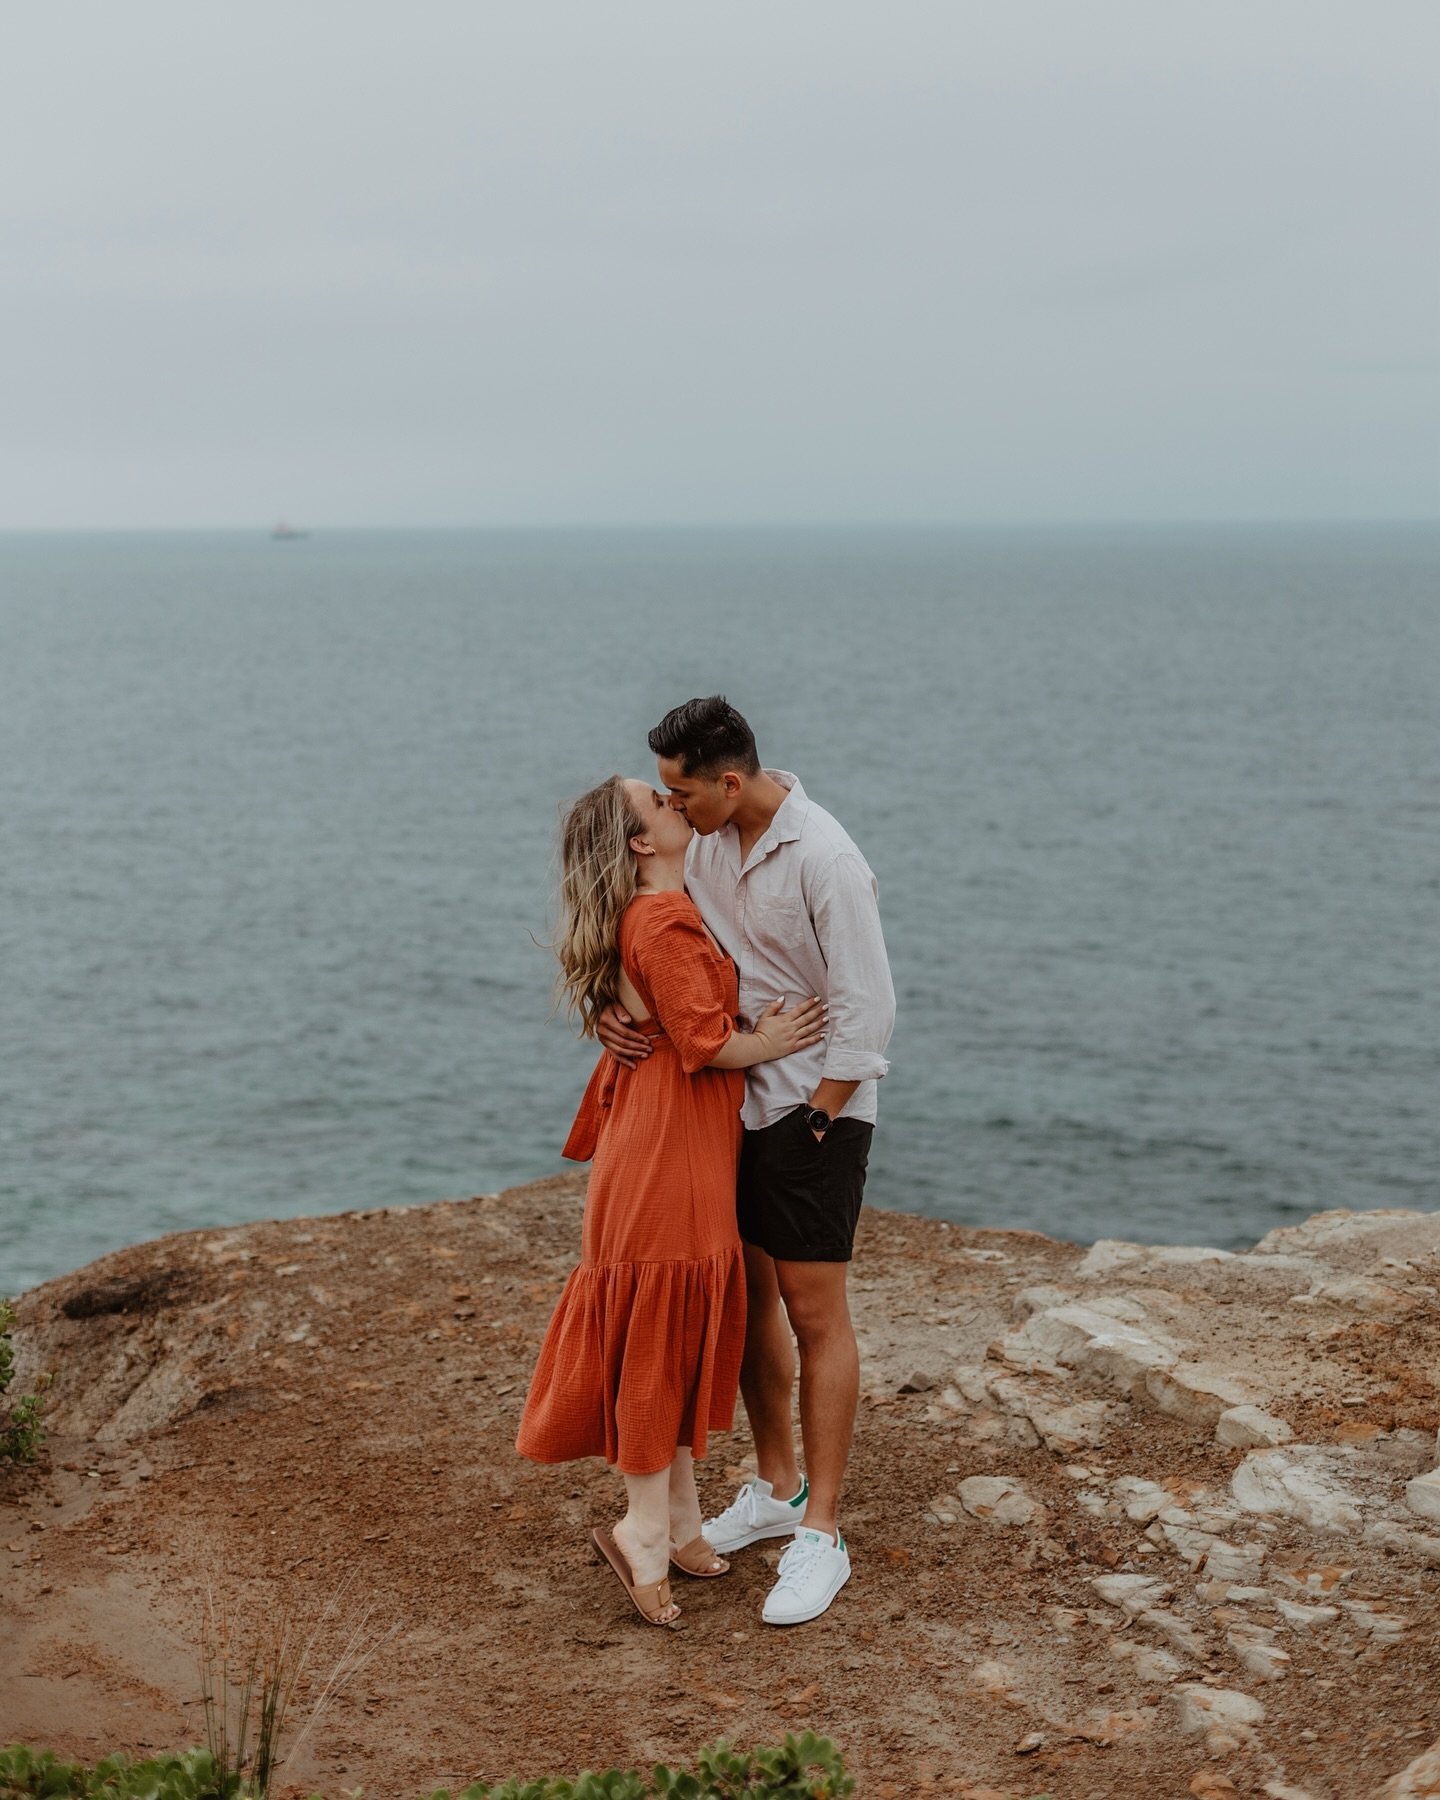 Seaside dates make for great engagement shoots!
Or why not get some couple photos just because? I bet it's not often that you get dressed nice, have a lovely date and get some beautiful photos of the two of you in whatever stage of life you're in!
My